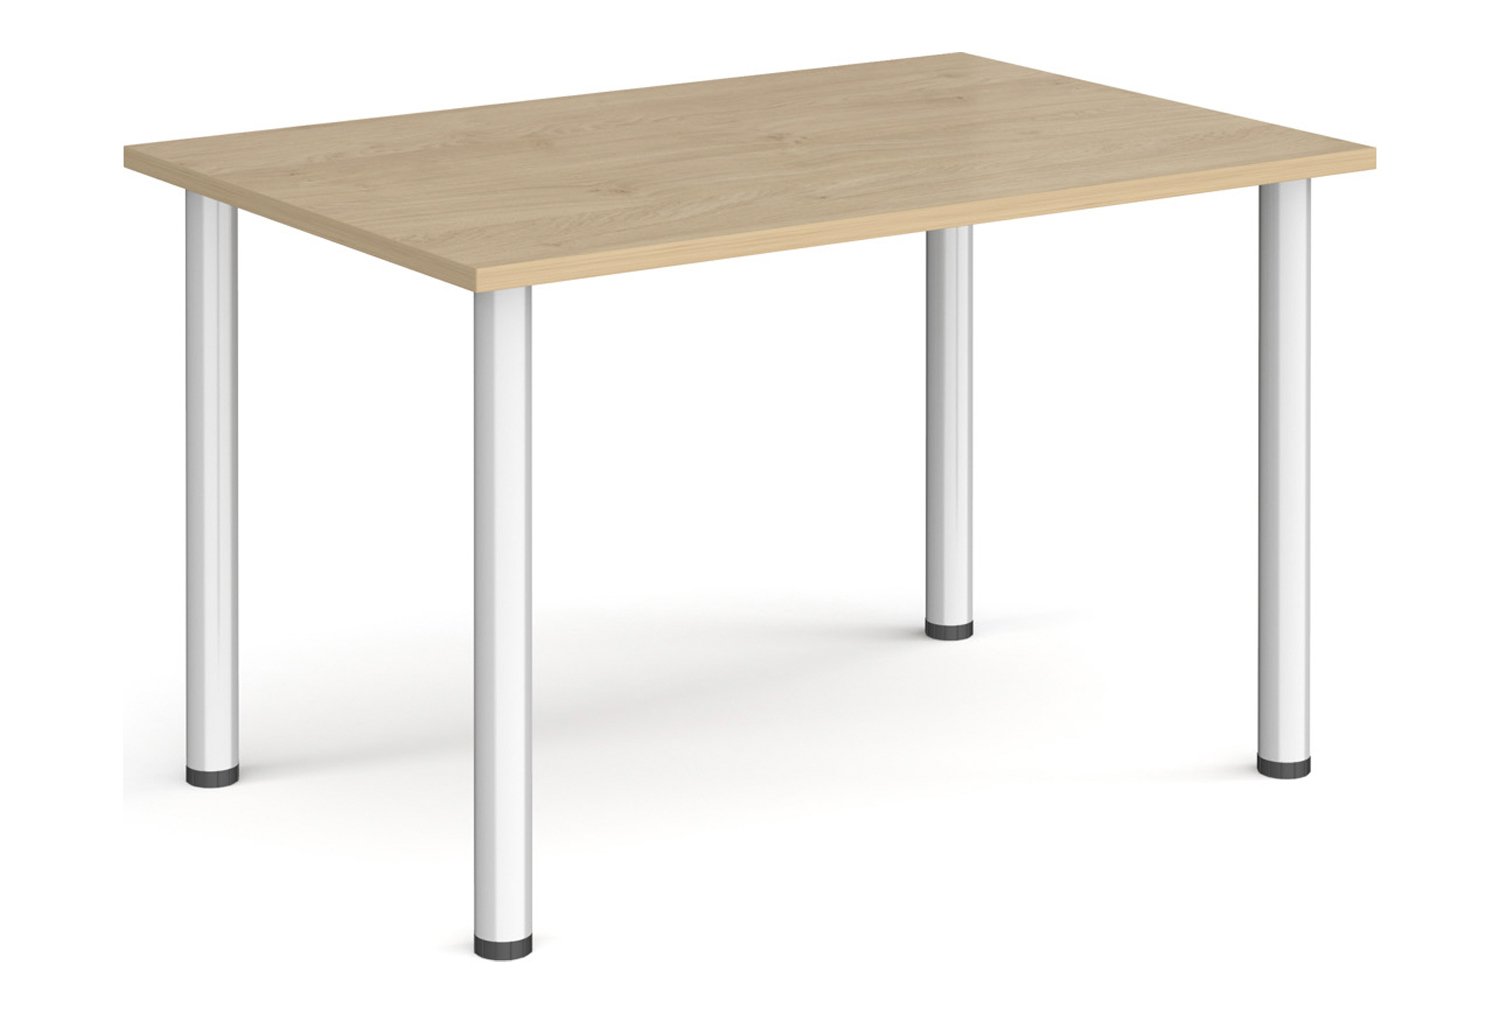 Pallas Rectangular Meeting Table, 120wx80dx73h (cm), Silver Frame, Kendal Oak, Express Delivery